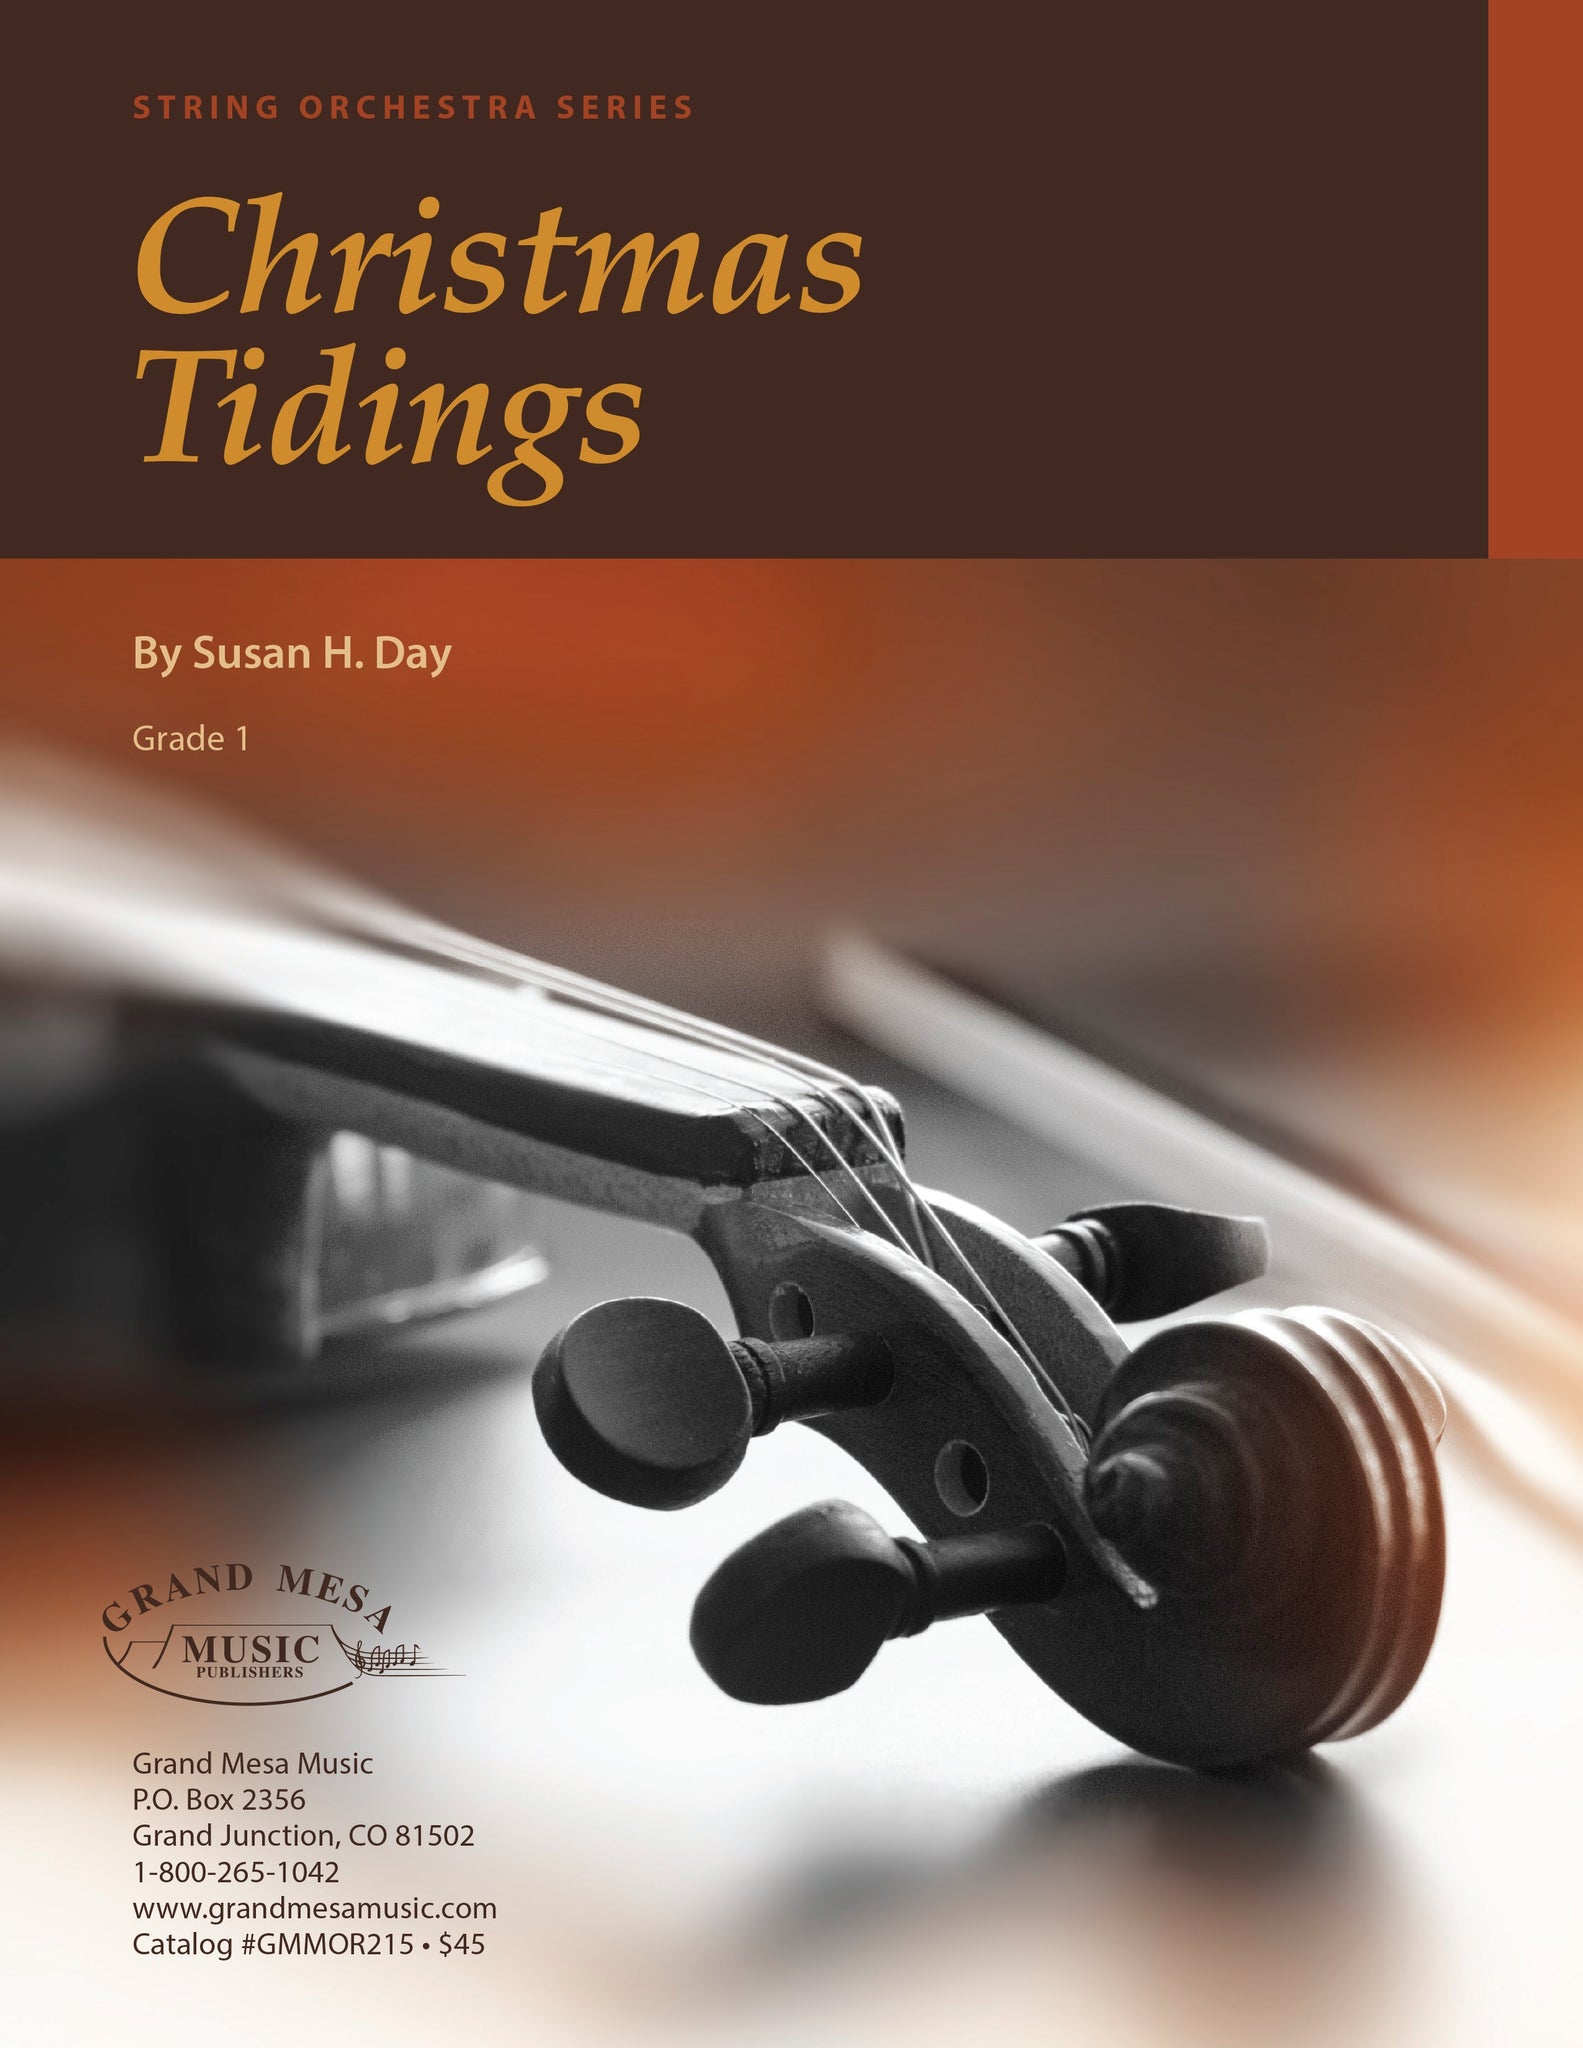 Strings sheet music cover of Christmas Tidings, composed by Susan Day.